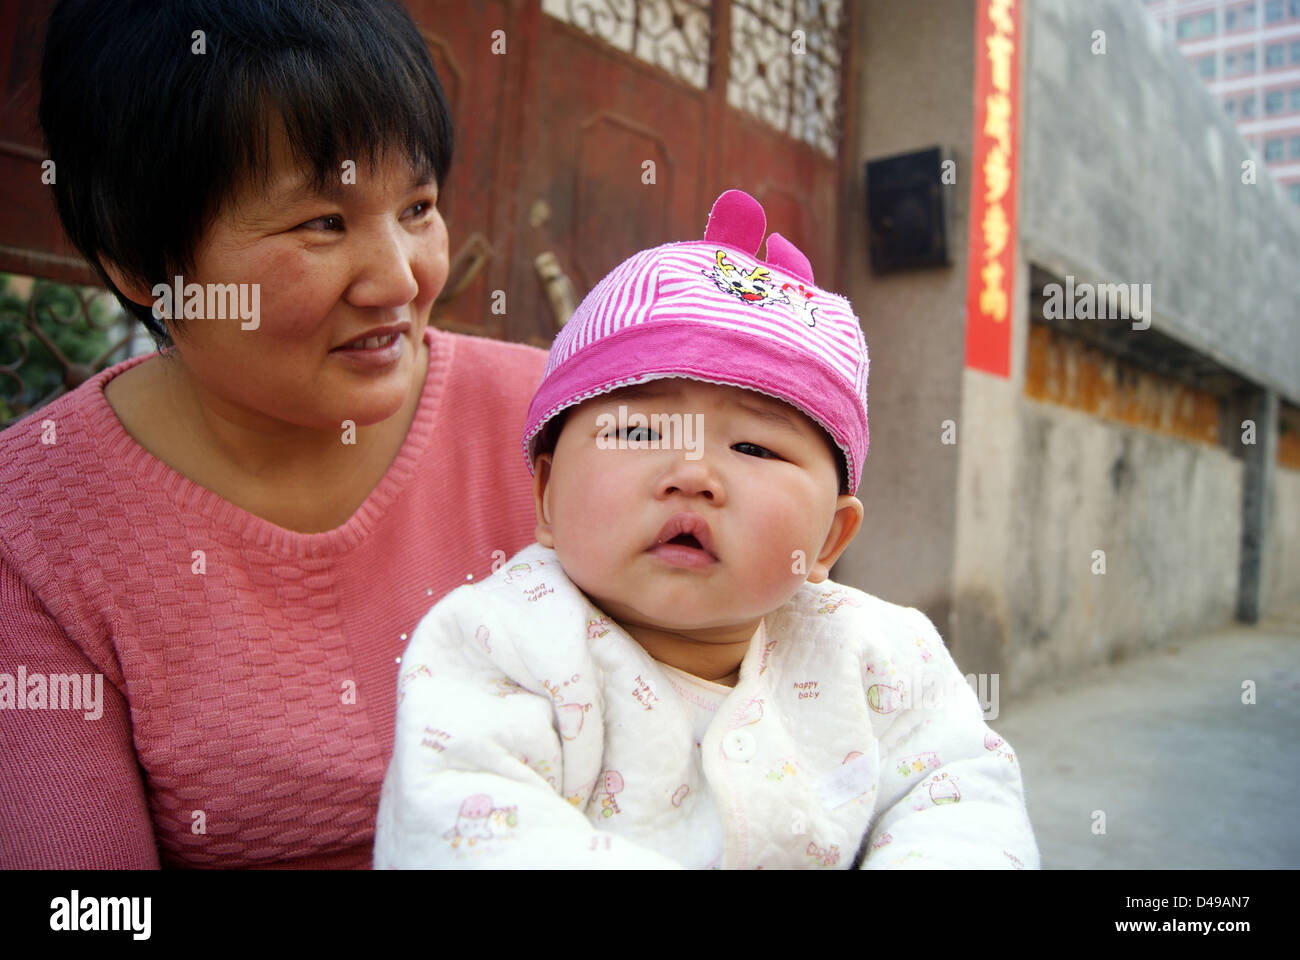 Chinese children, more than one year old child Stock Photo